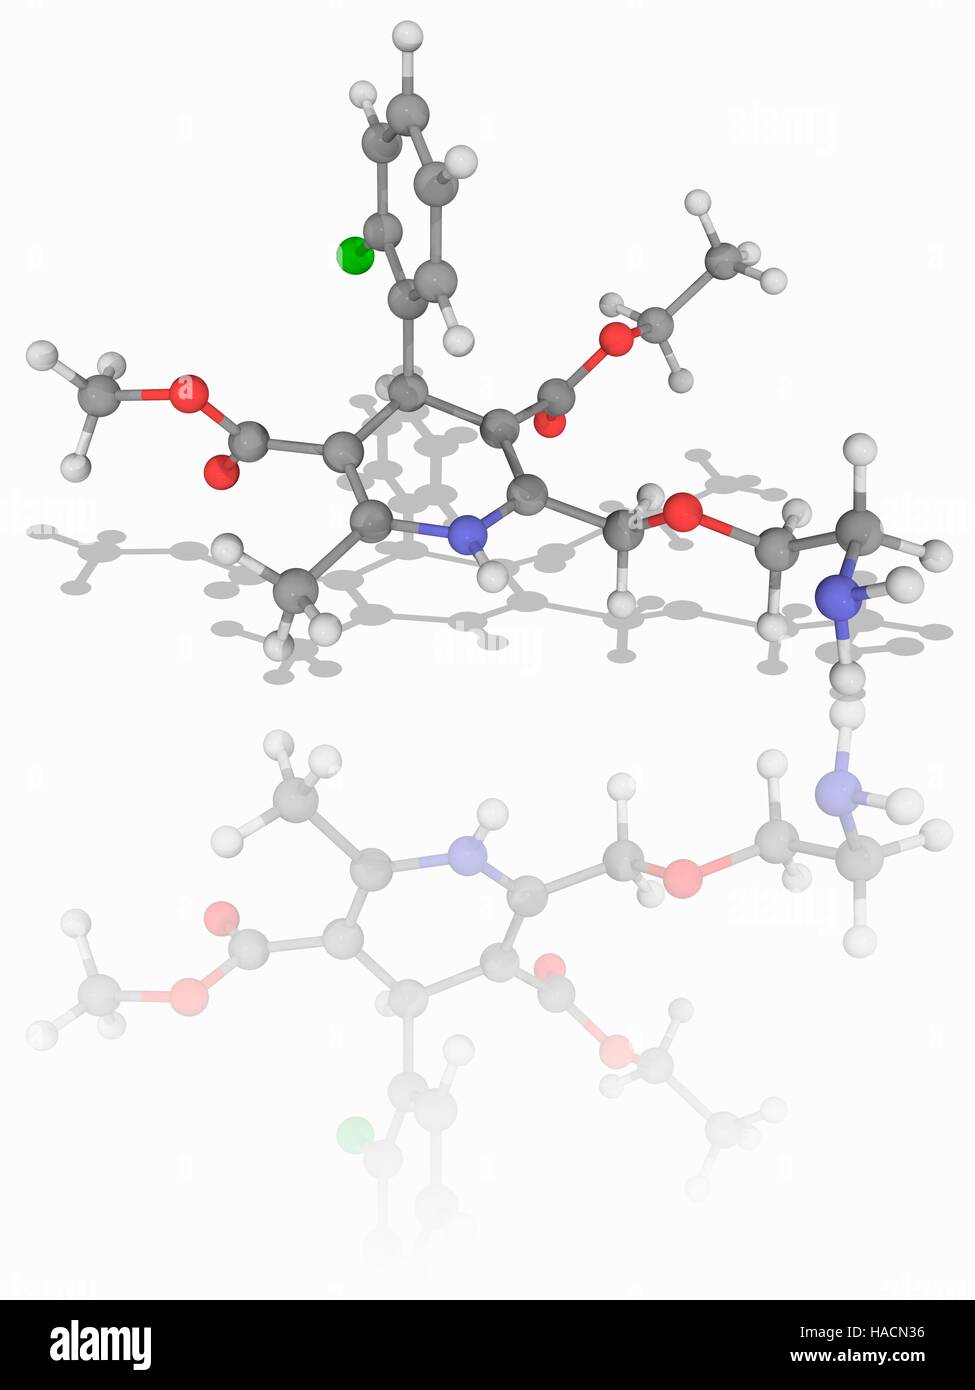 Amlodipine. Molecular model of the calcium channel blocker drug amlodipine (C20.H25.Cl.N2.O5), used to treat hypertension, angina and coronary artery disease. Atoms are represented as spheres and are colour-coded: carbon (grey), hydrogen (white), chlorine (green), nitrogen (blue) and oxygen (red). Illustration. Stock Photo